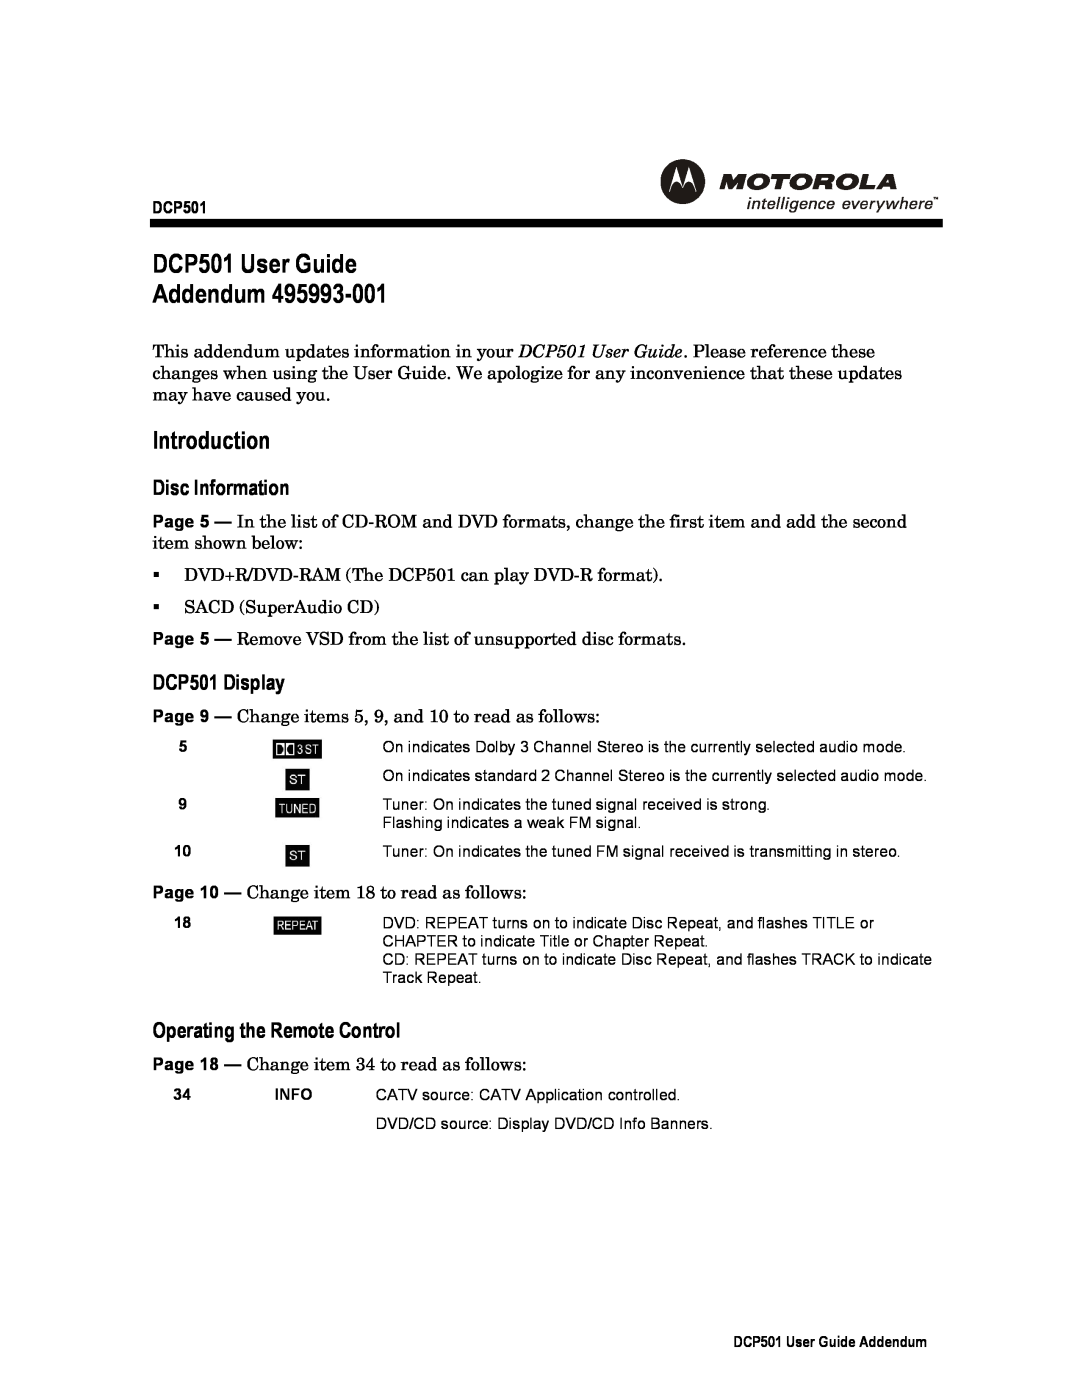 Motorola manual Introduction, Disc Information, DCP501 Display, Operating the Remote Control 